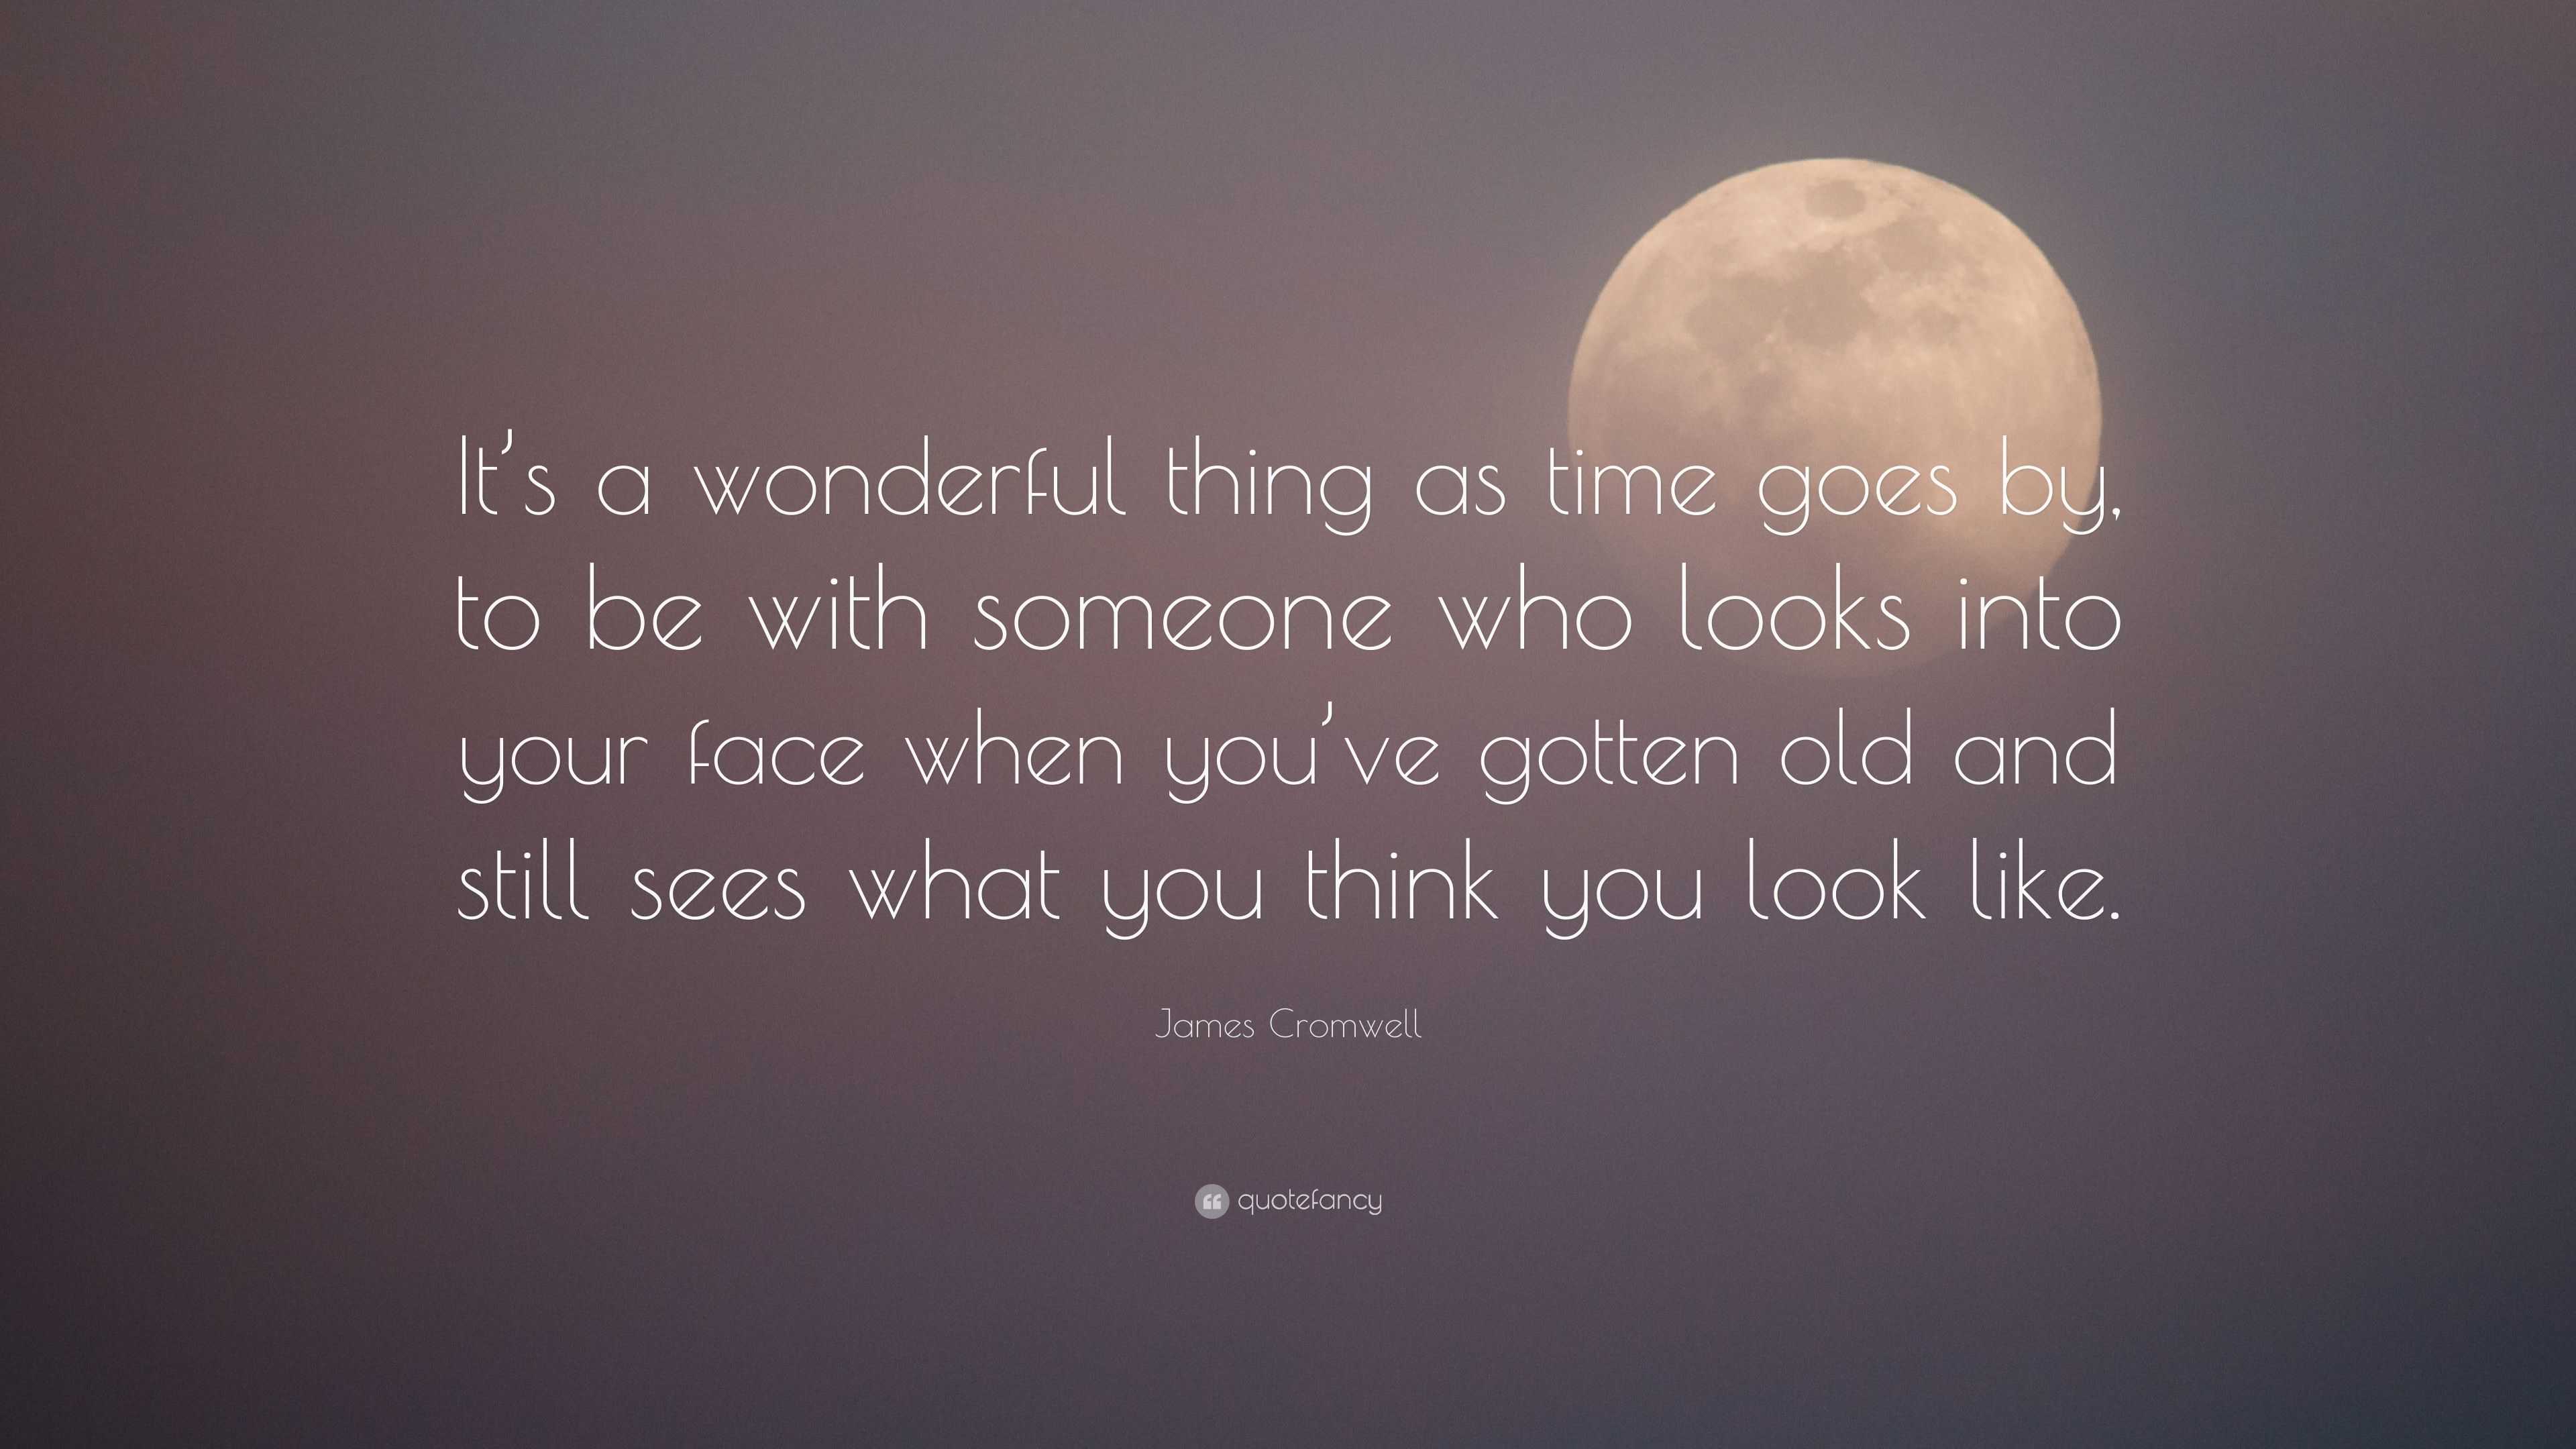 James Cromwell Quote: “It’s a wonderful thing as time goes by, to be ...